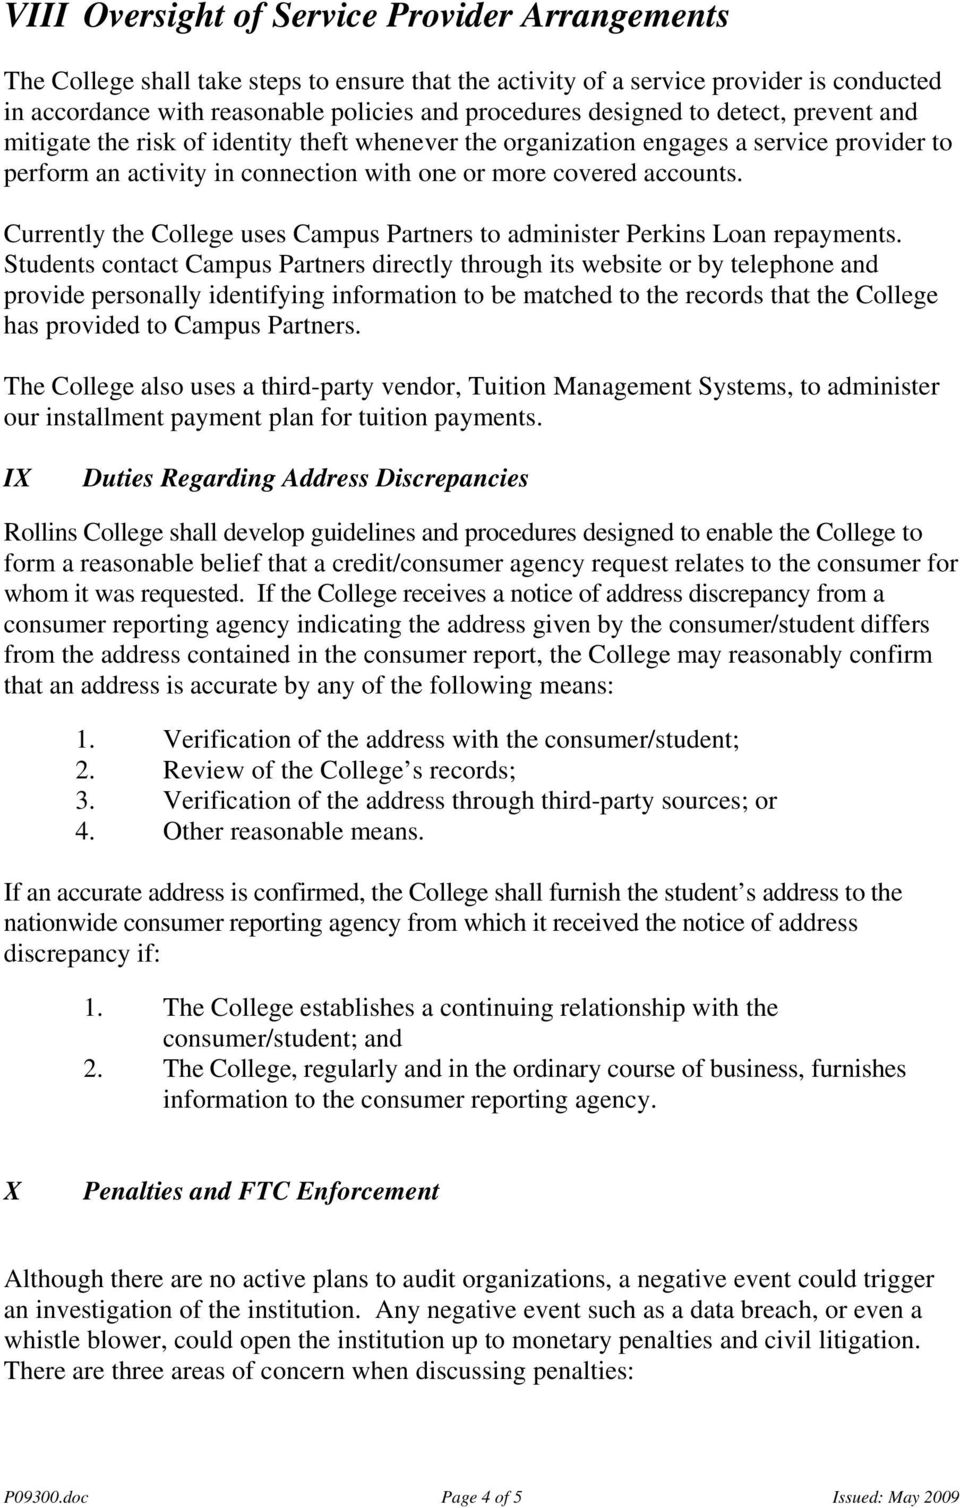 Currently the College uses Campus Partners to administer Perkins Loan repayments.